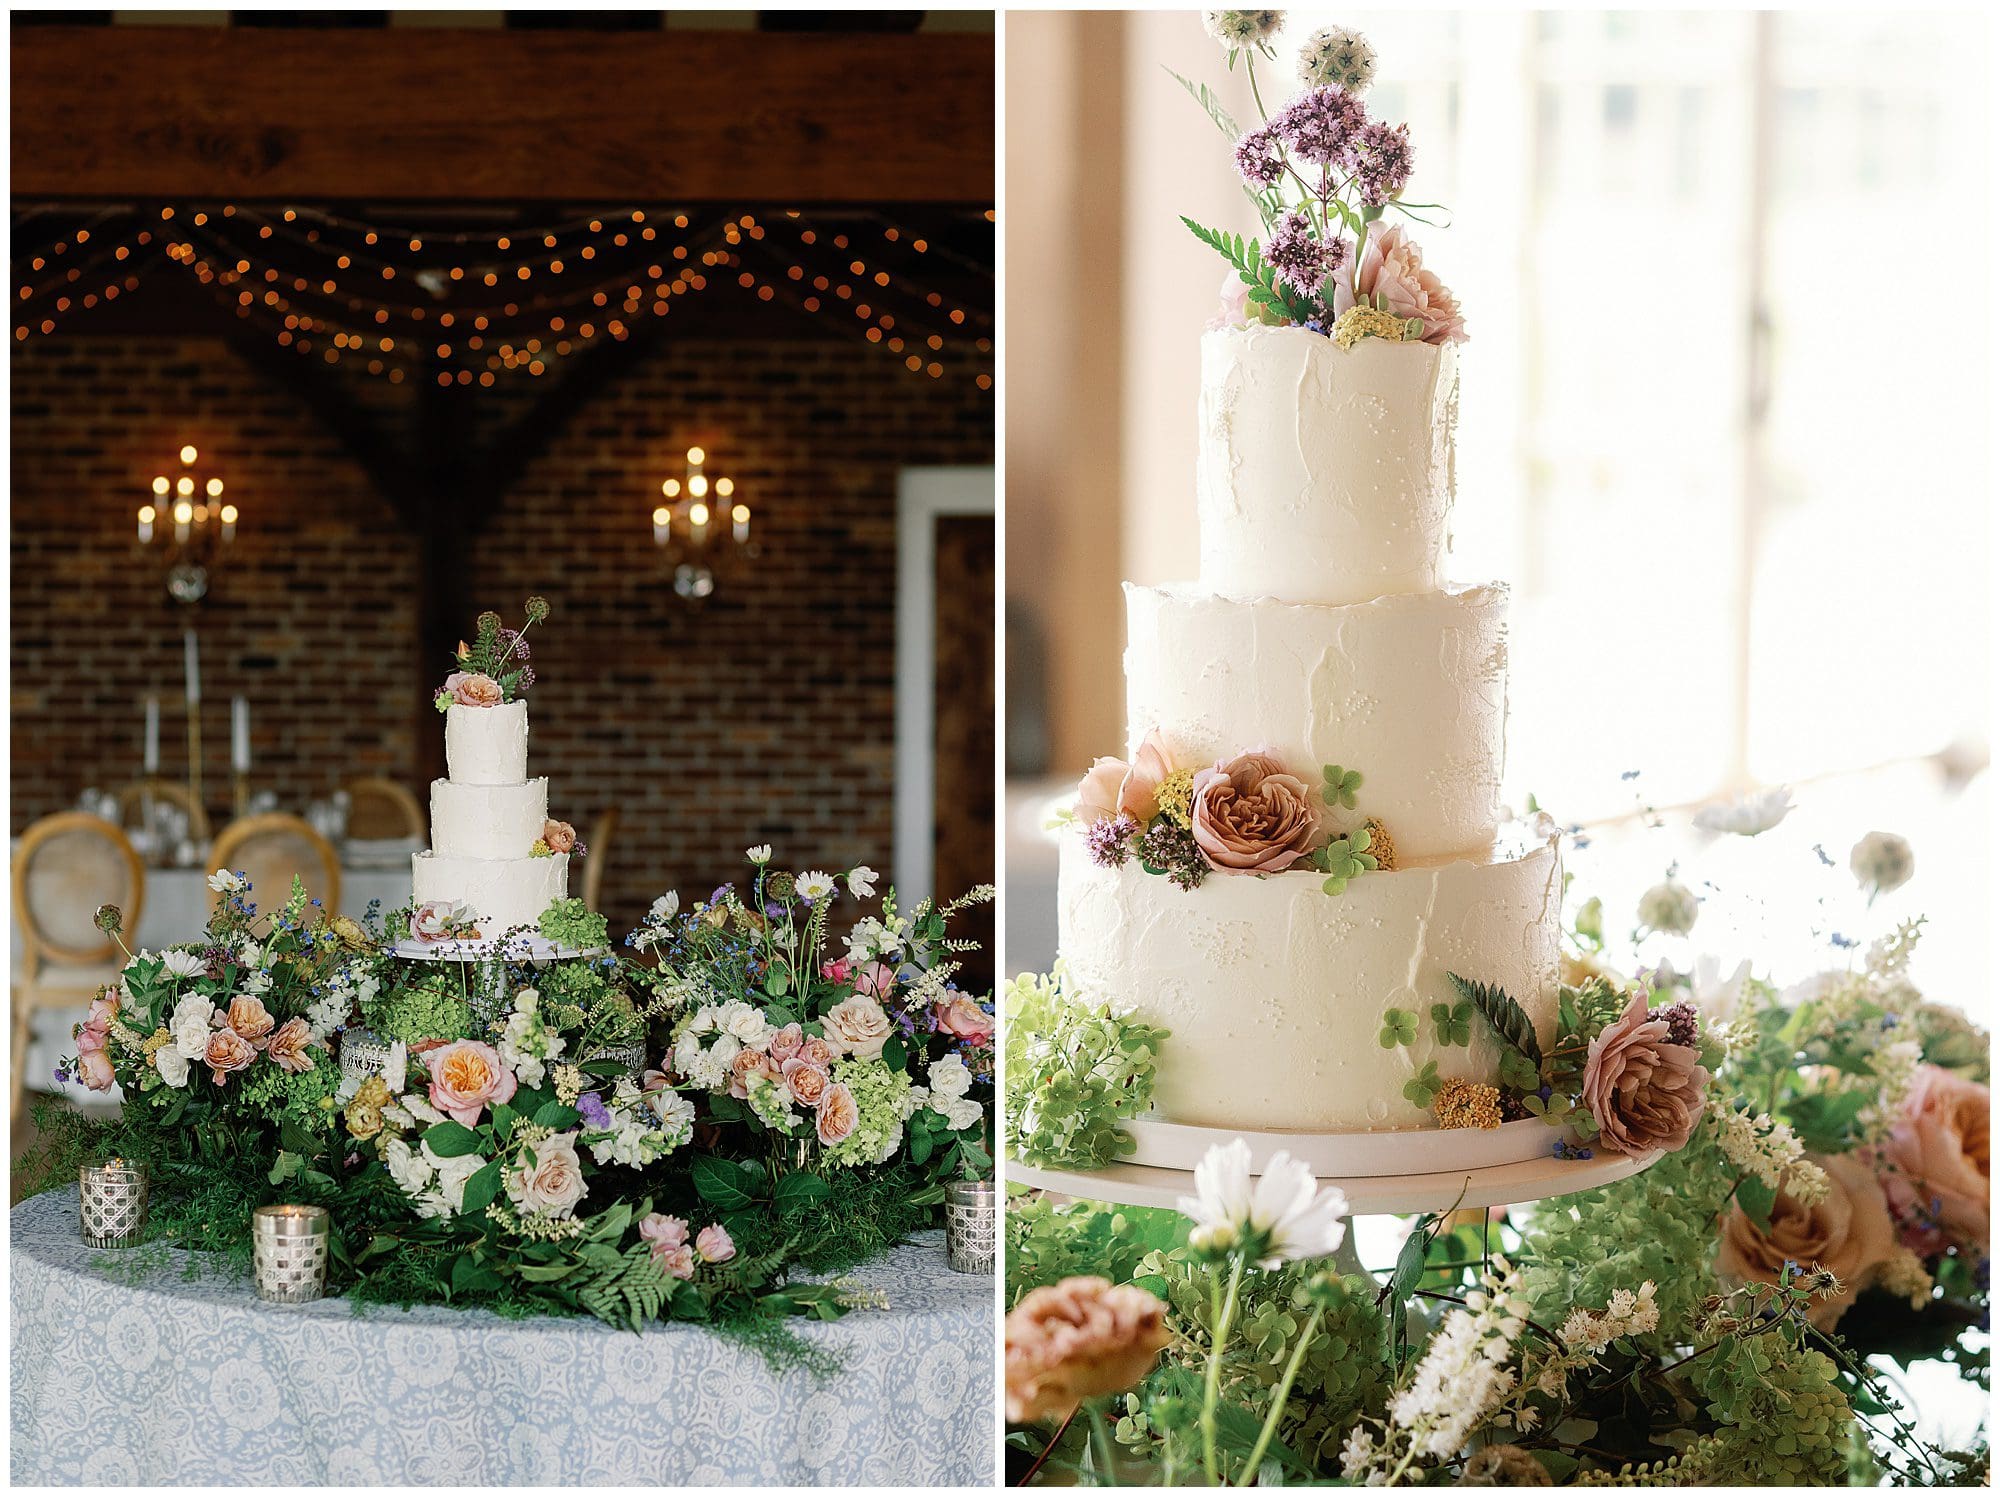 Two pictures of a Parisian-inspired summer wedding cake displayed at The Ridge.